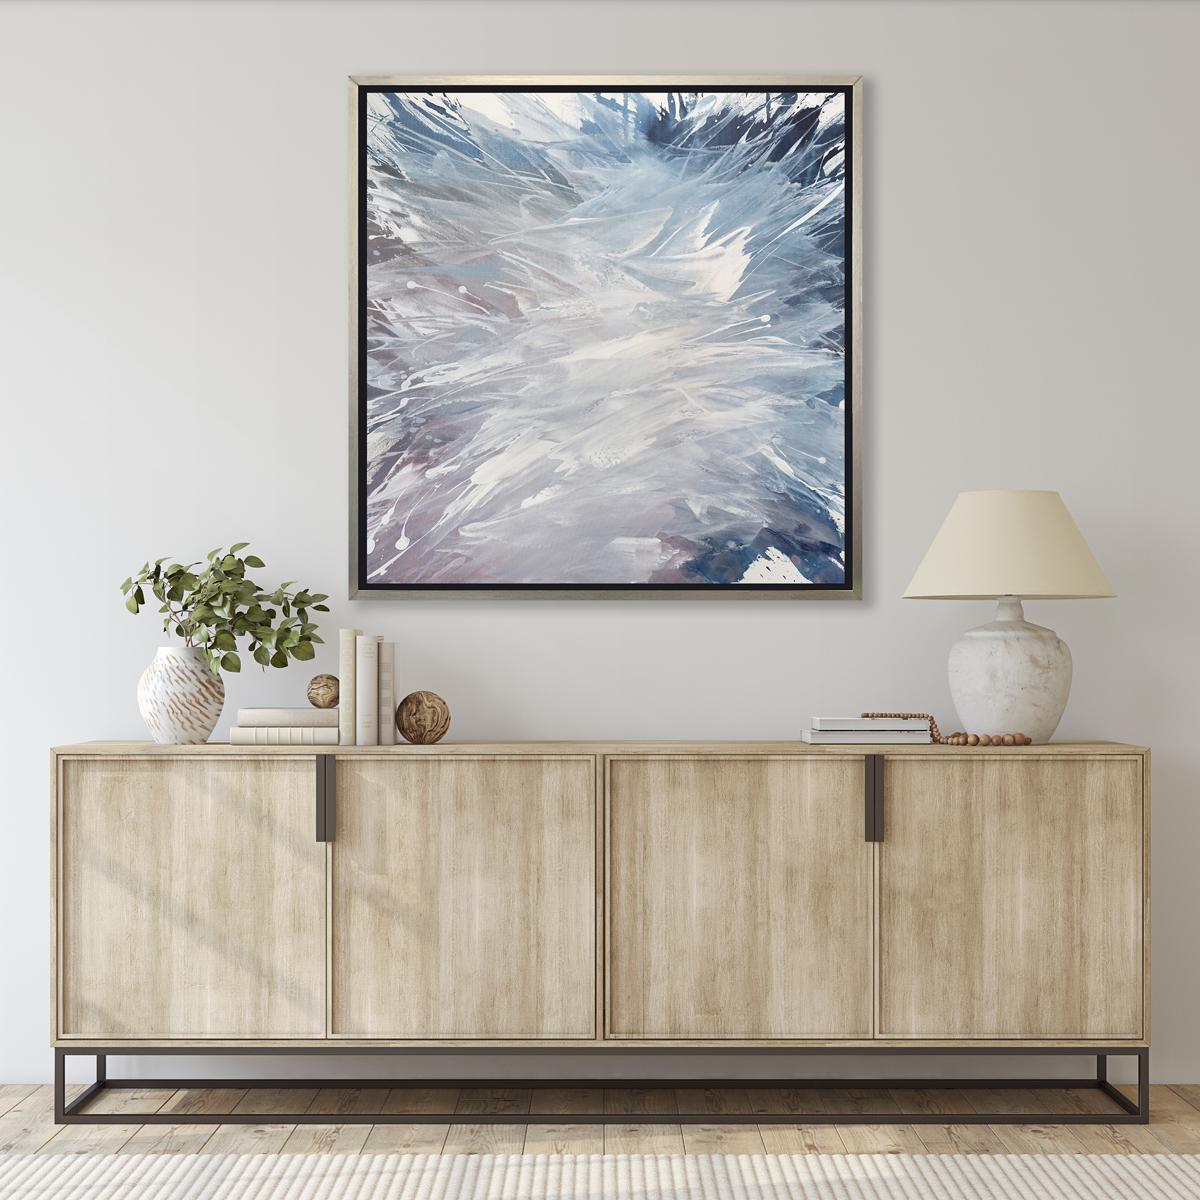 This contemporary abstract limited edition print by Teodora Guererra features a cool palette with varying shades of blue, as well as a warm violet and white, and broad, sweeping gestures, creating an almost splashing effect for added energy and